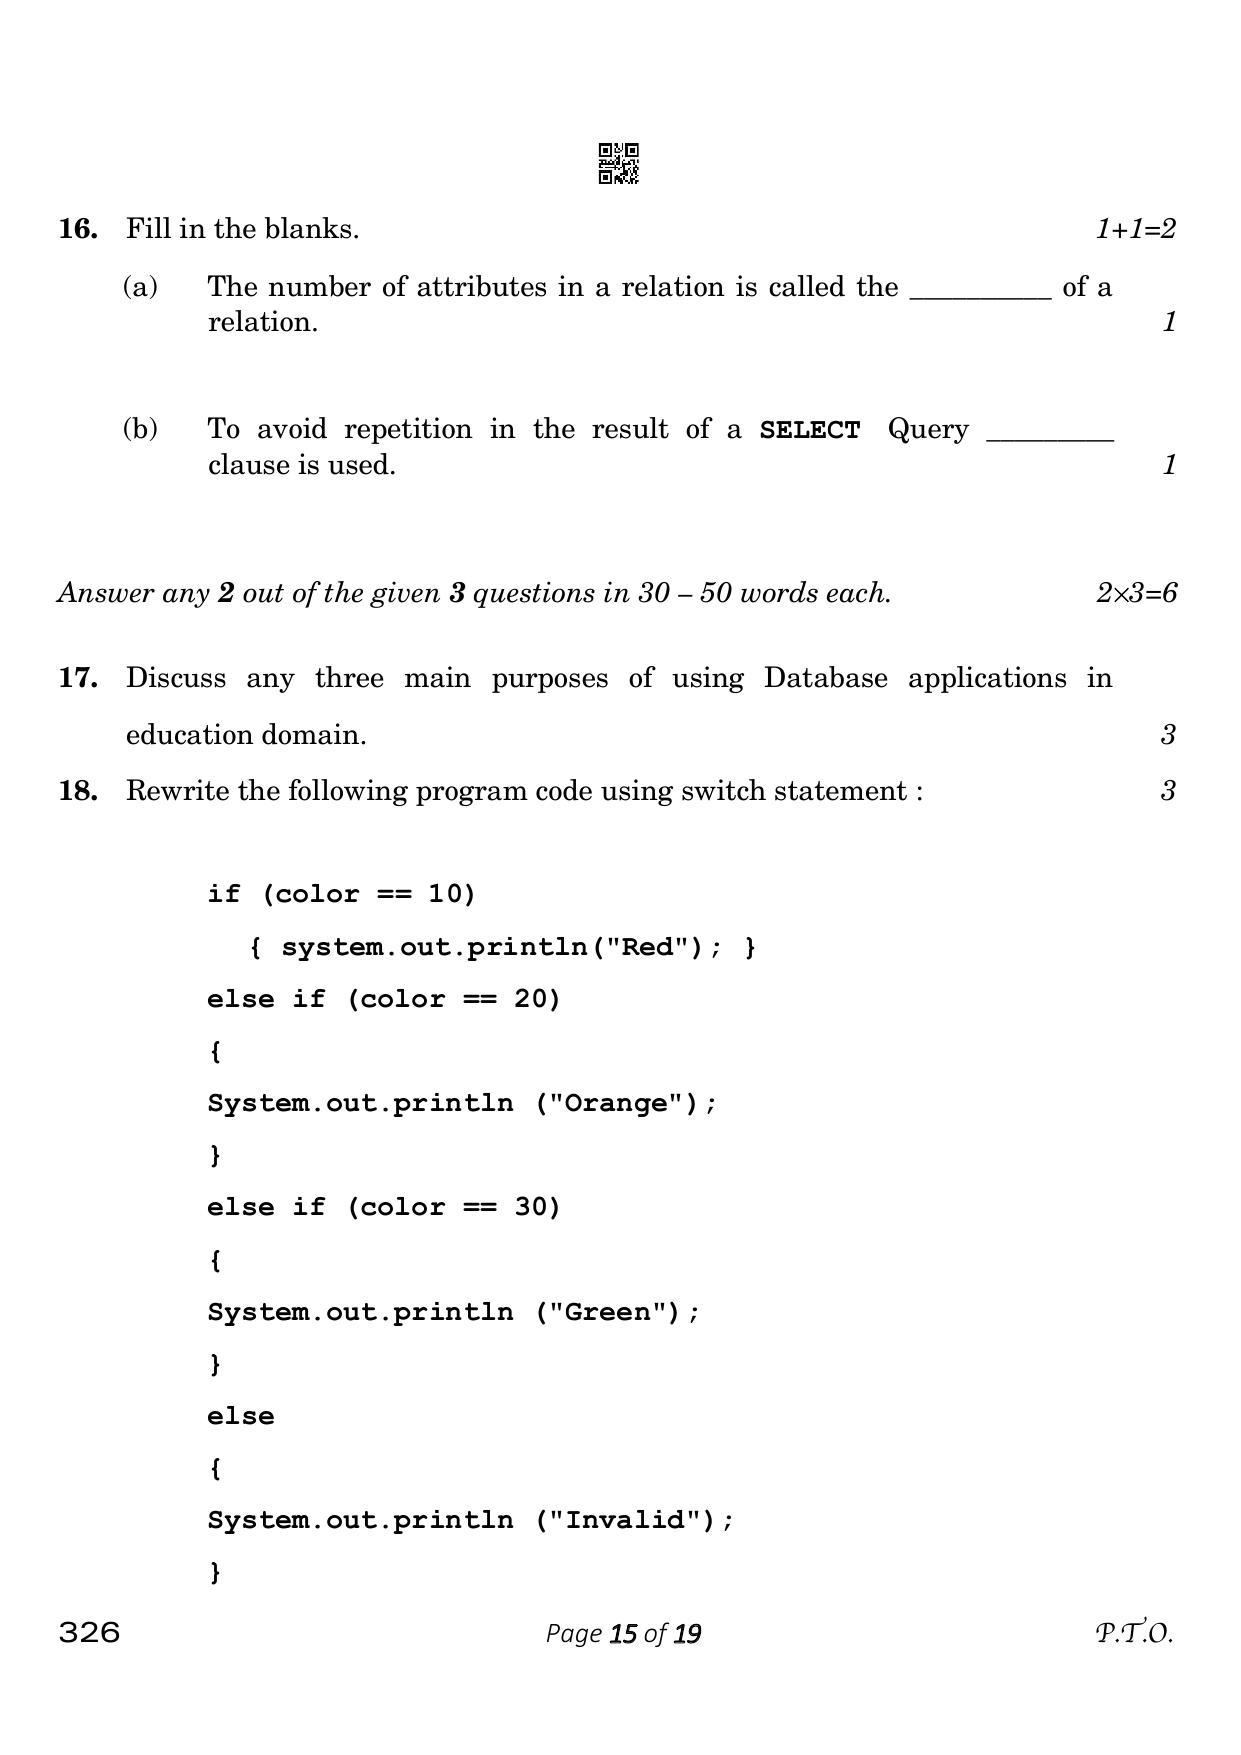 CBSE Class 12 326_Information Technology 2023 Question Paper - Page 15